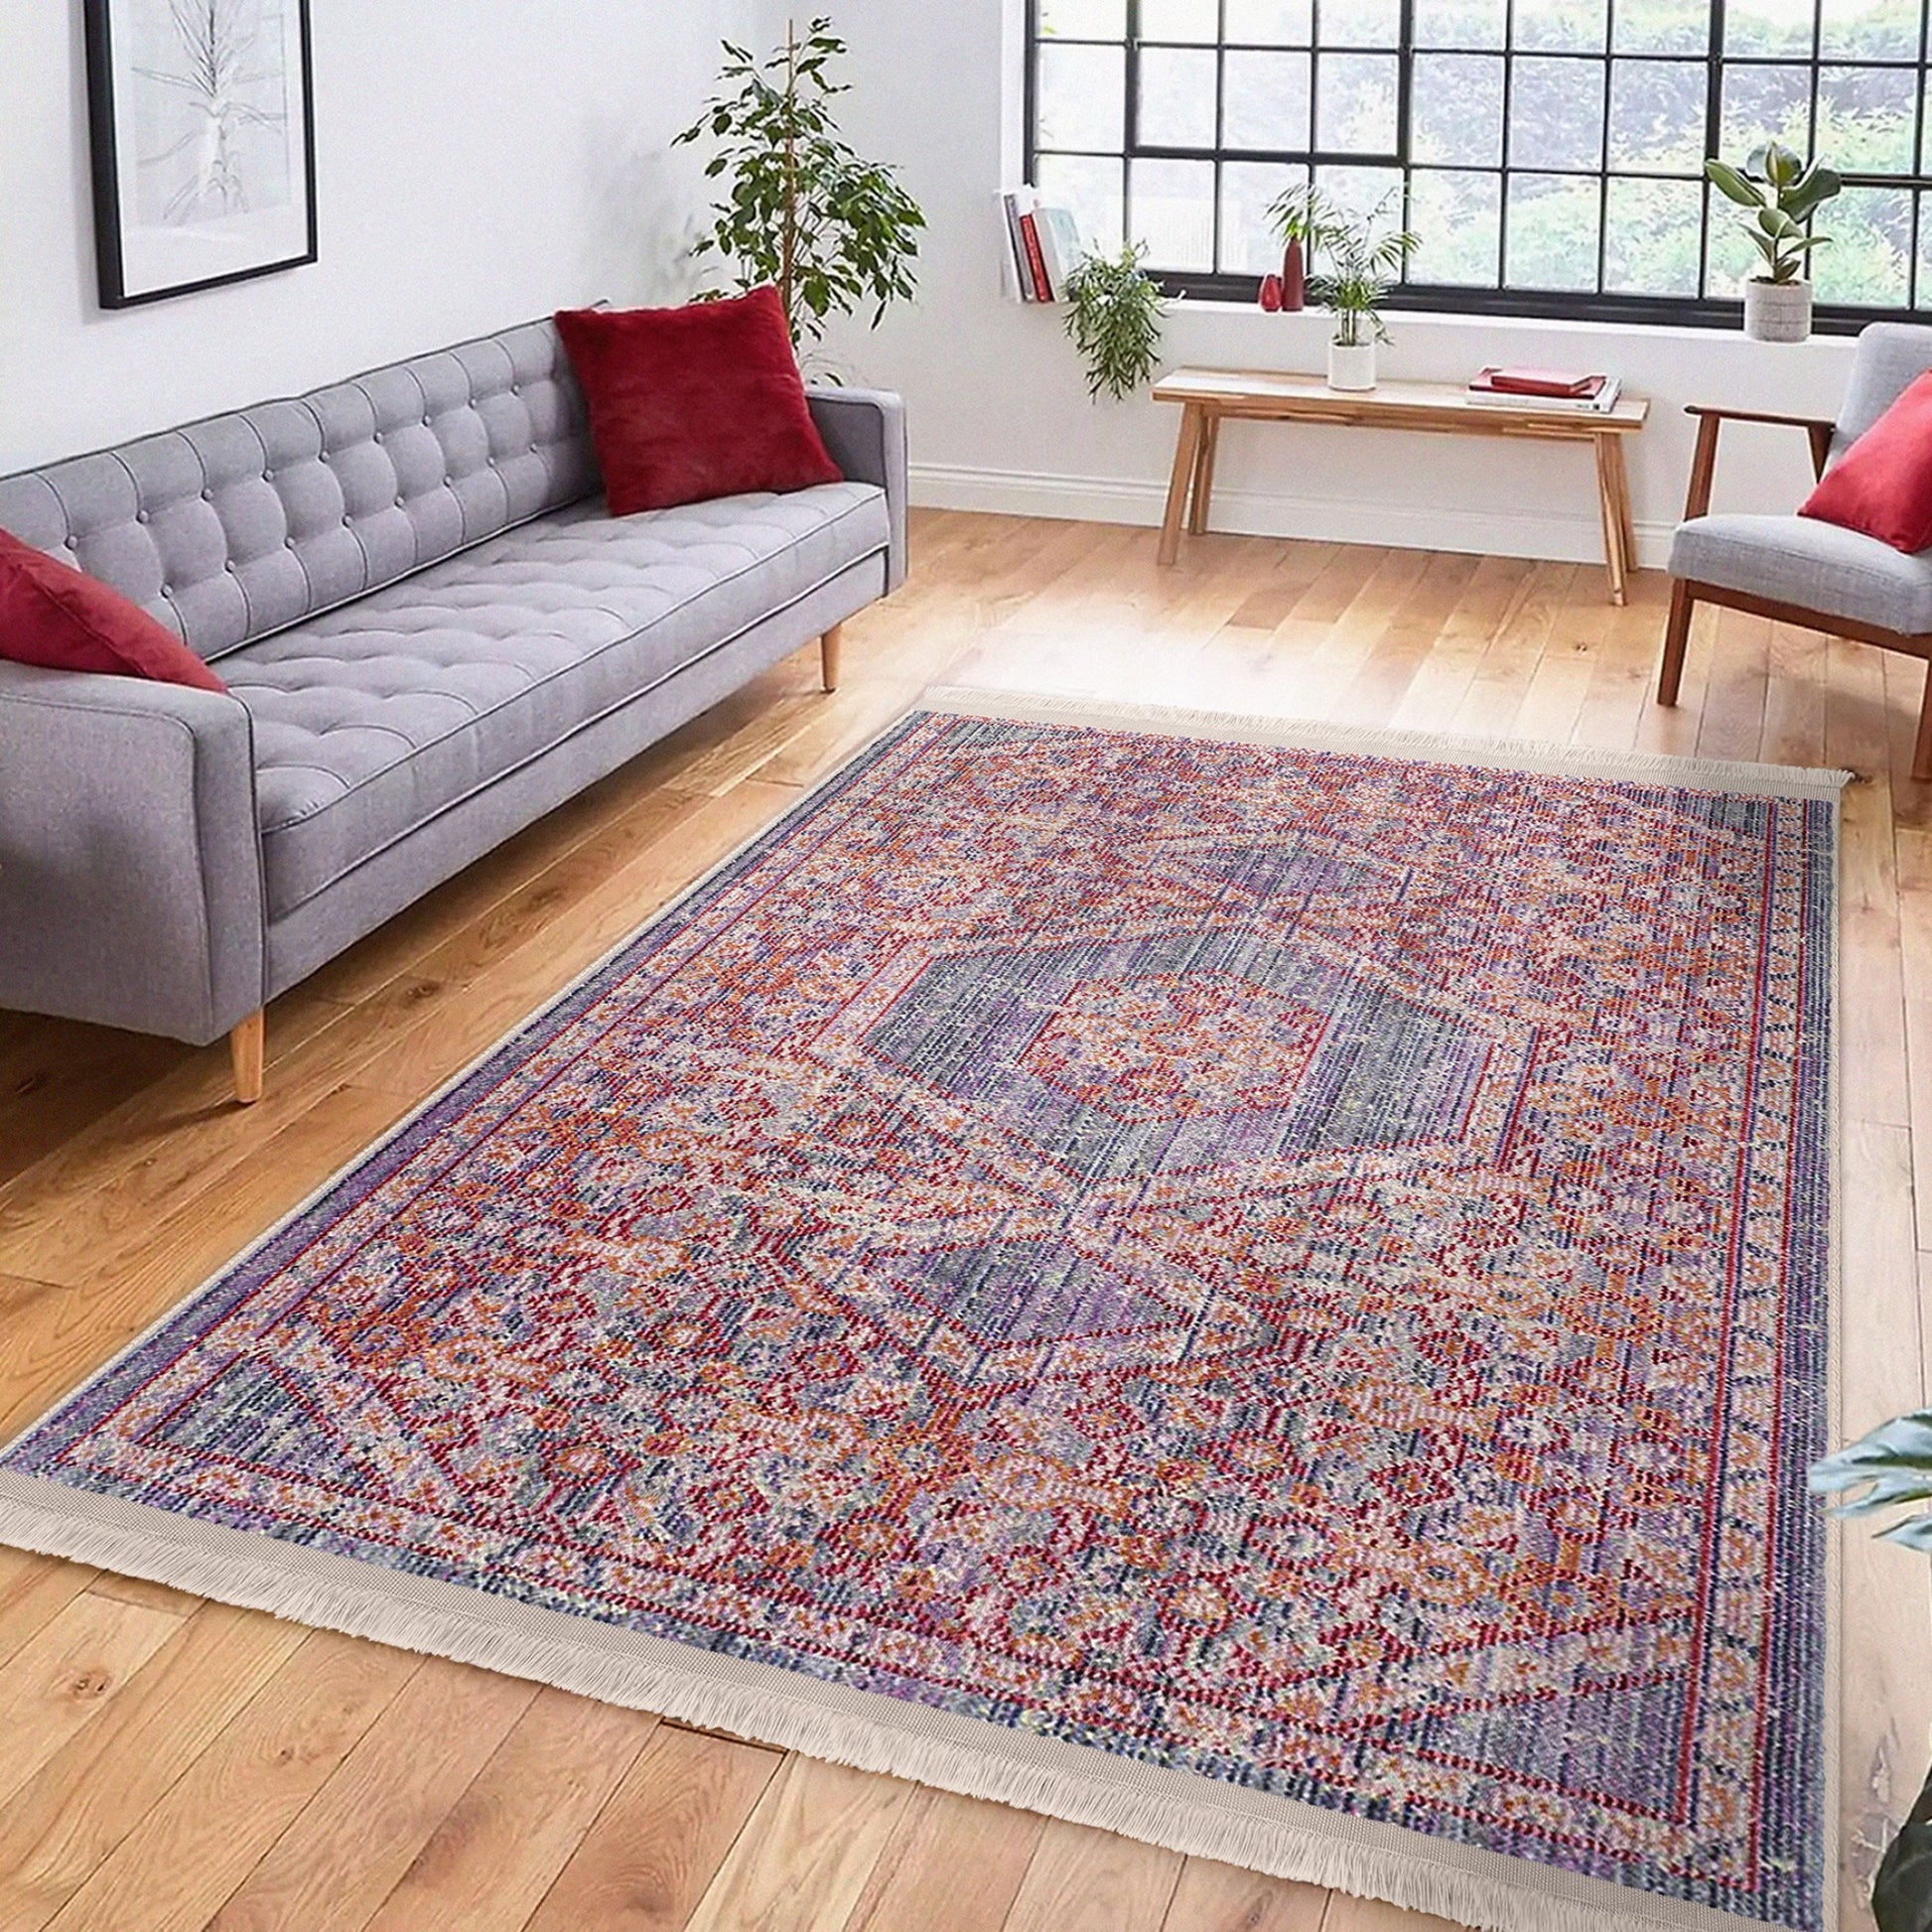 Functional Rug with Timeless Persian Craftsmanship